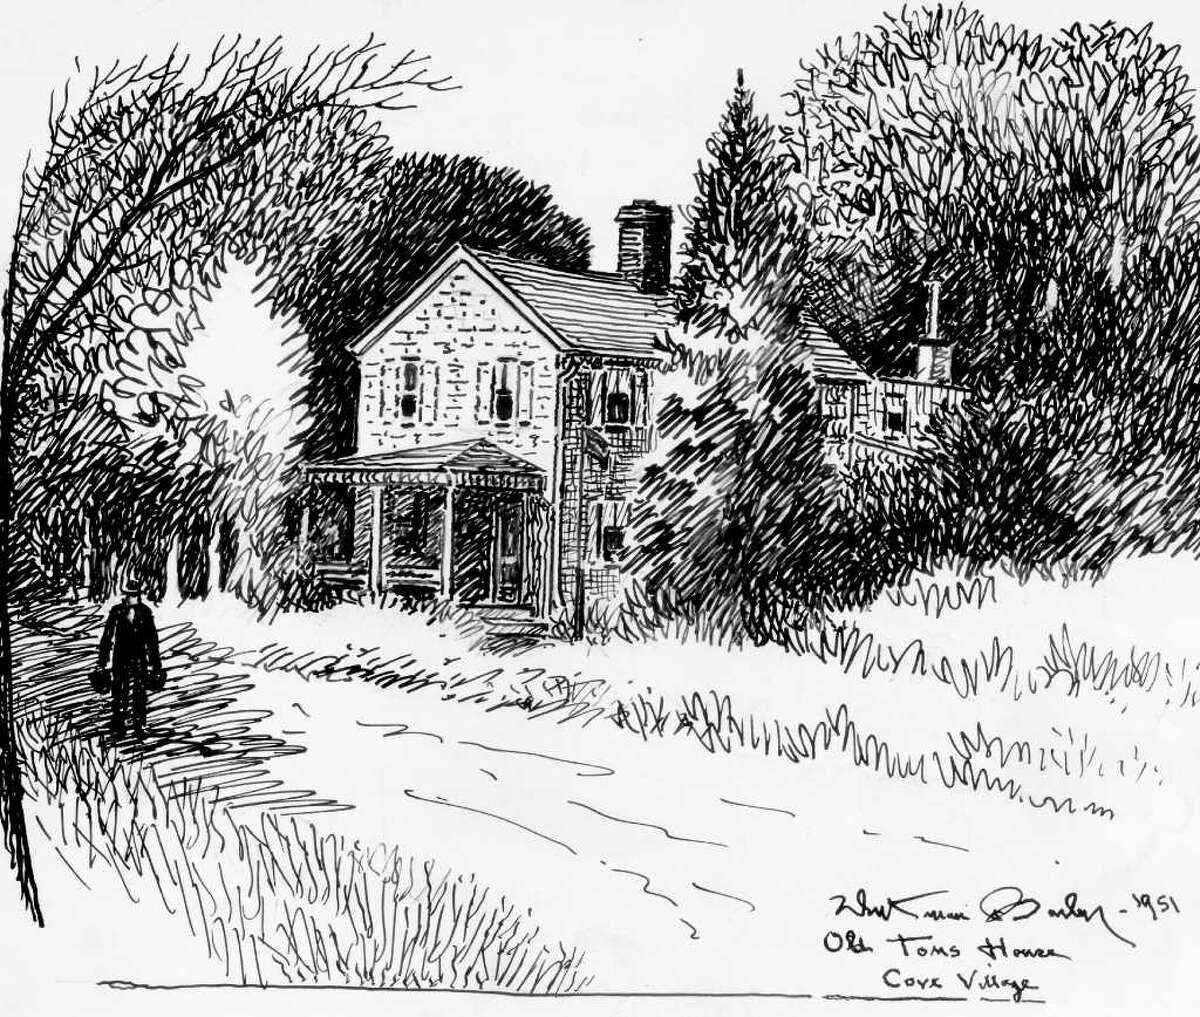 Sketch by Whitman Bailey originally published on Oct. 27, 1951. Old George Washington Toms house in Cove Village.